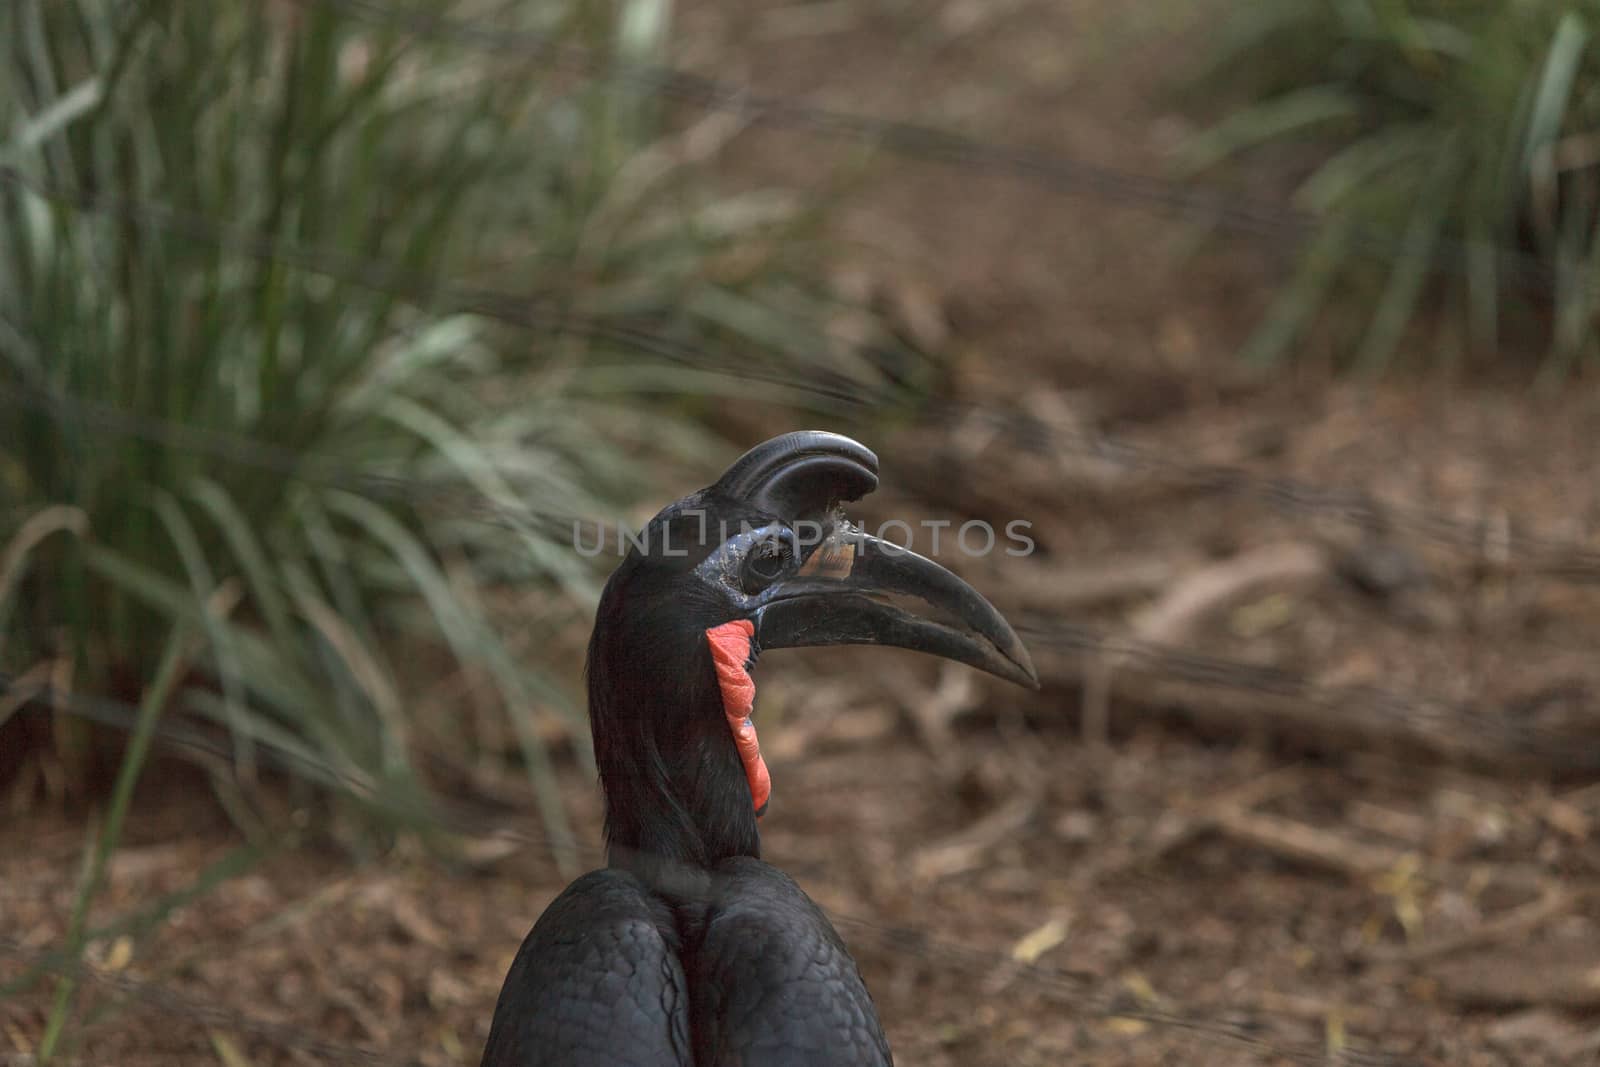 Abyssinian ground hornbill, Bucorvus abyssinicus, bird is black with feathers that look like thick eye lashes. Males have a red bib. Females are all black. This bird can be found in Africa.